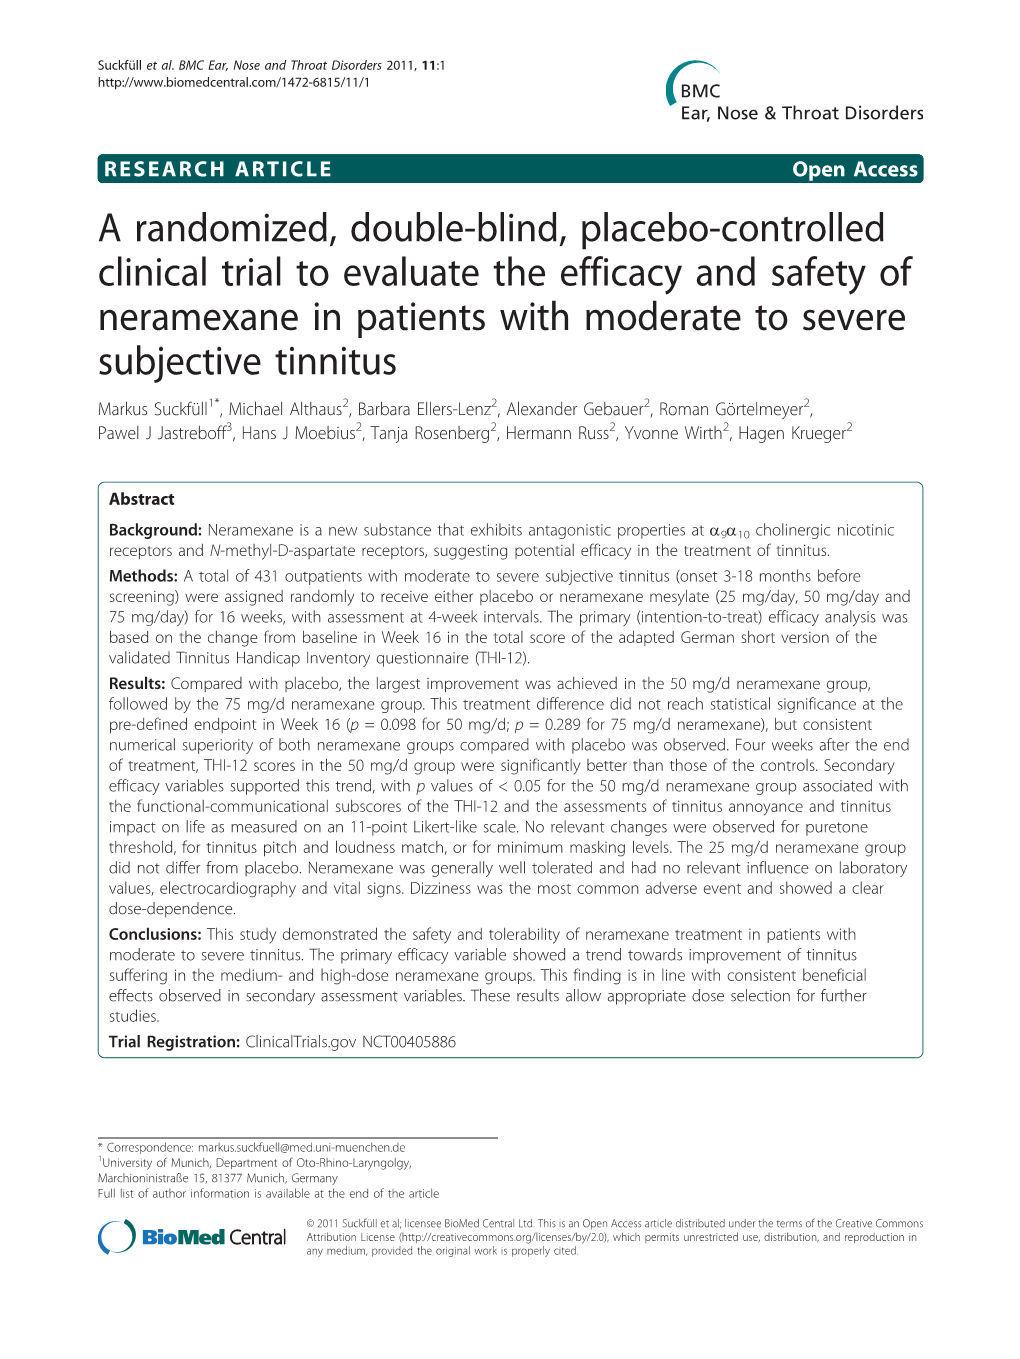 A Randomized, Double-Blind, Placebo-Controlled Clinical Trial To